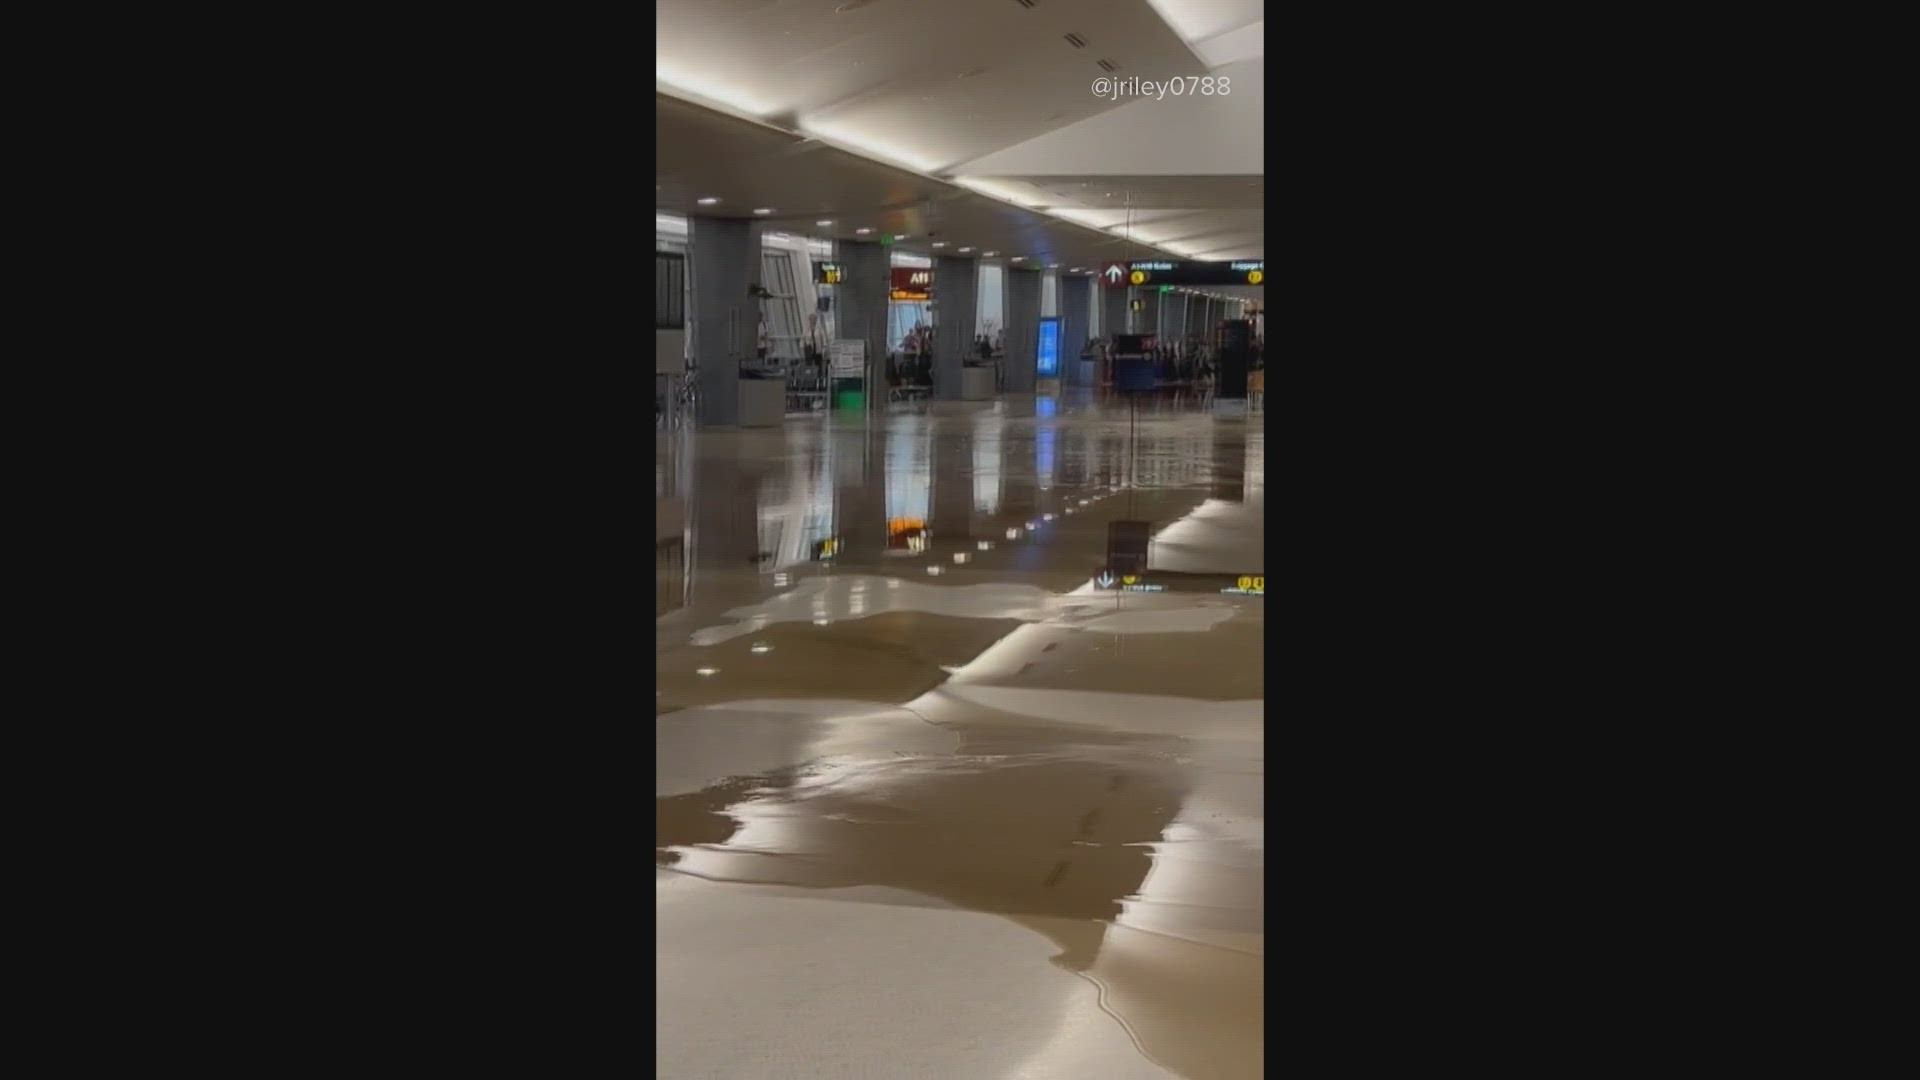 An airport spokesperson said "a large flood of water" was discovered early Tuesday morning.